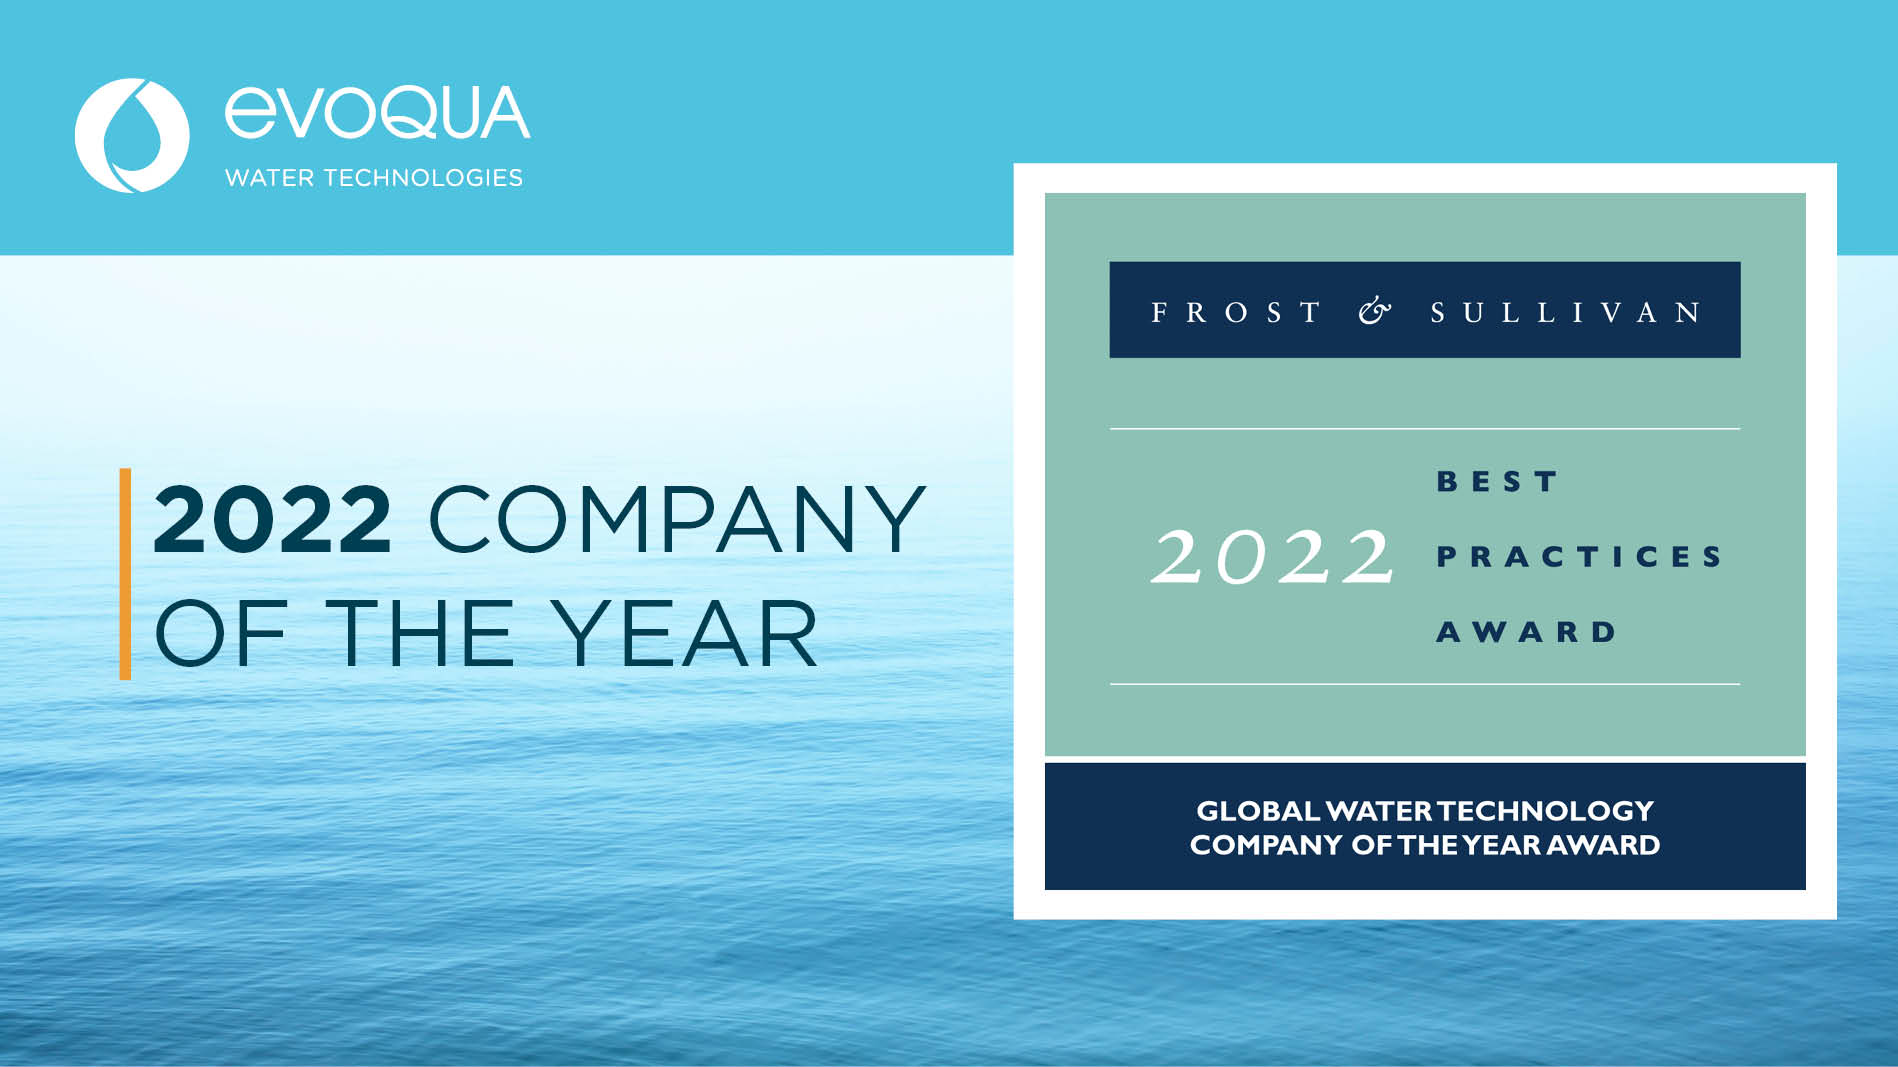 Evoqua Water Technologies Recognized by Frost & Sullivan as Global Company of the Year in the Water Technology Industry